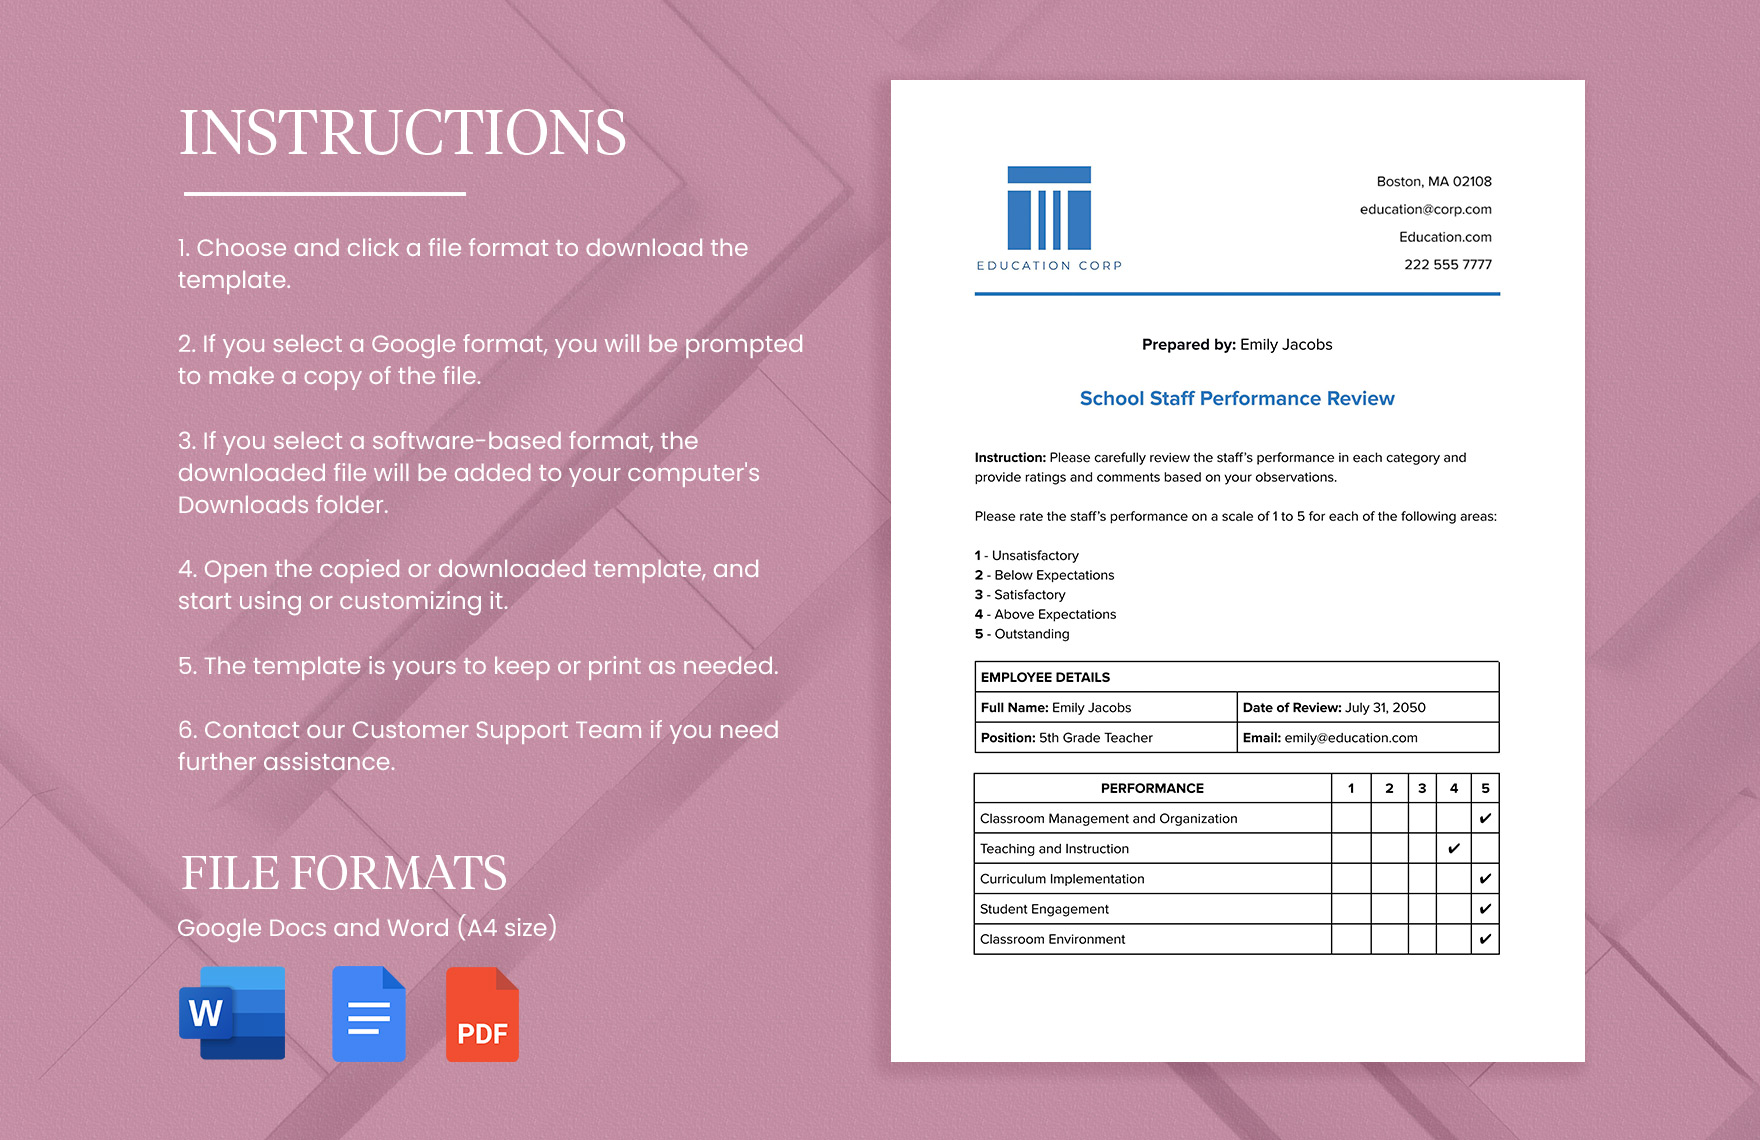 School Staff Performance Review Form Template